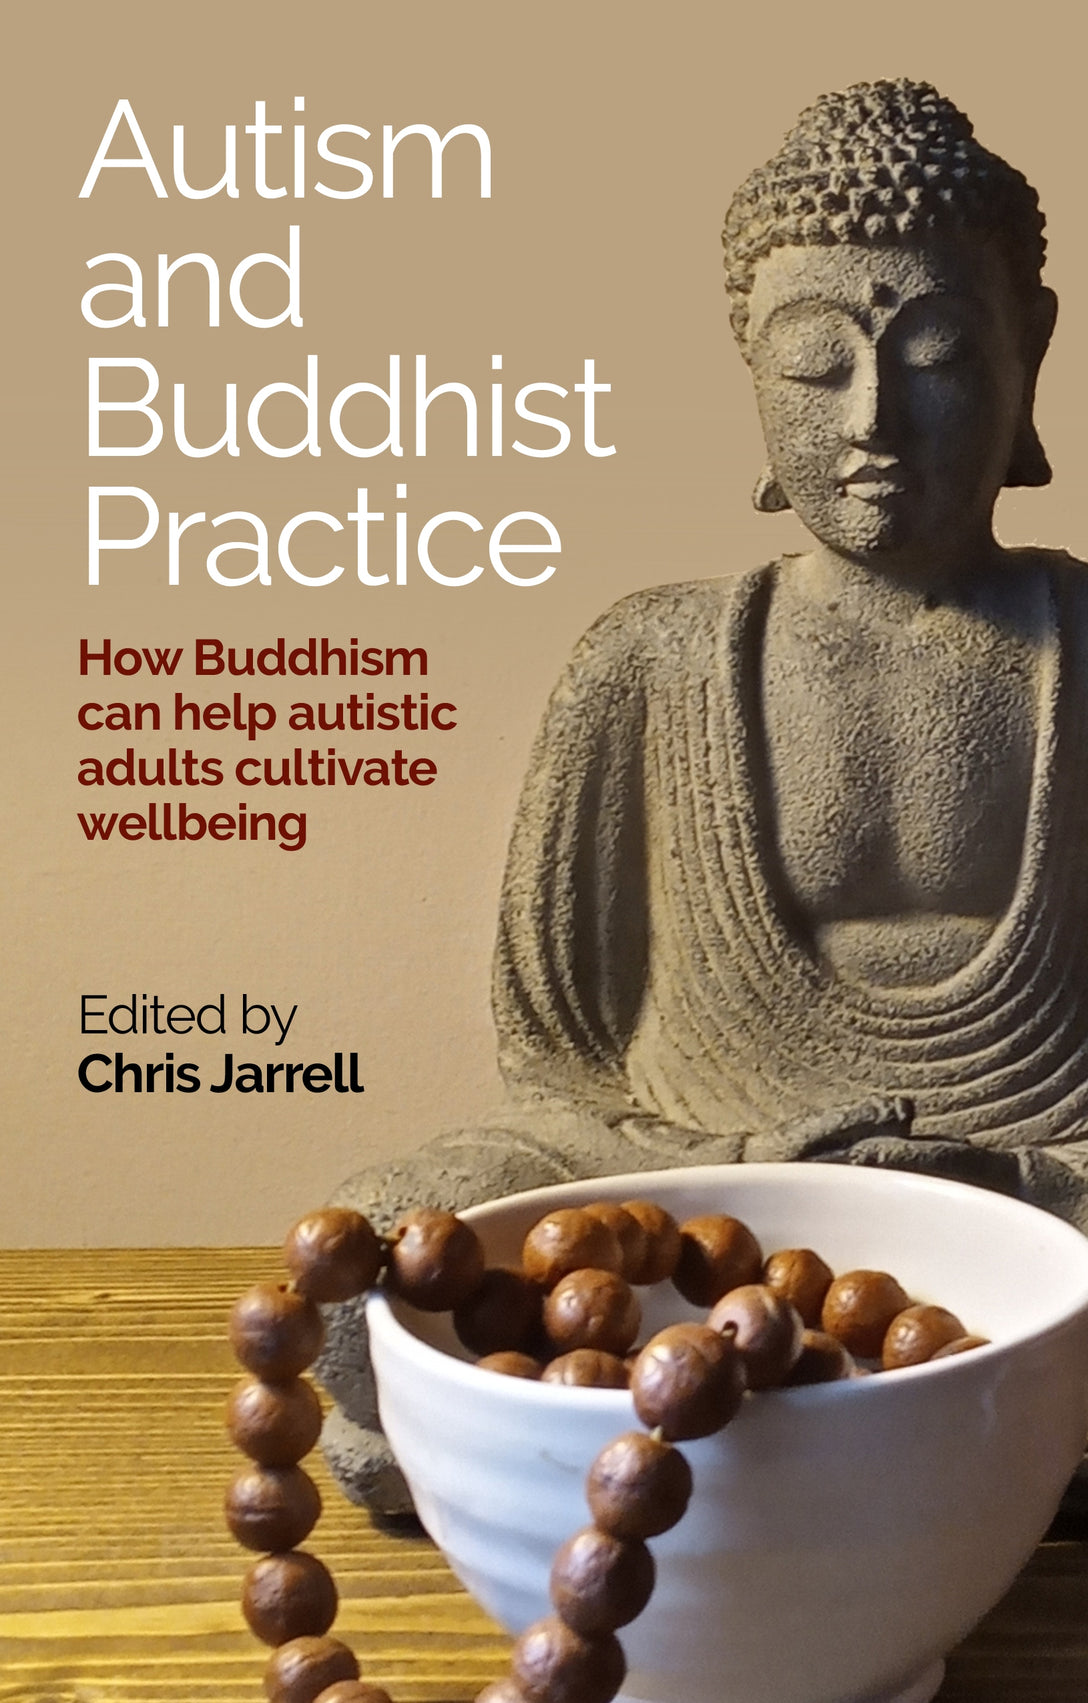 Autism and Buddhist Practice by No Author Listed, Chris Jarrell